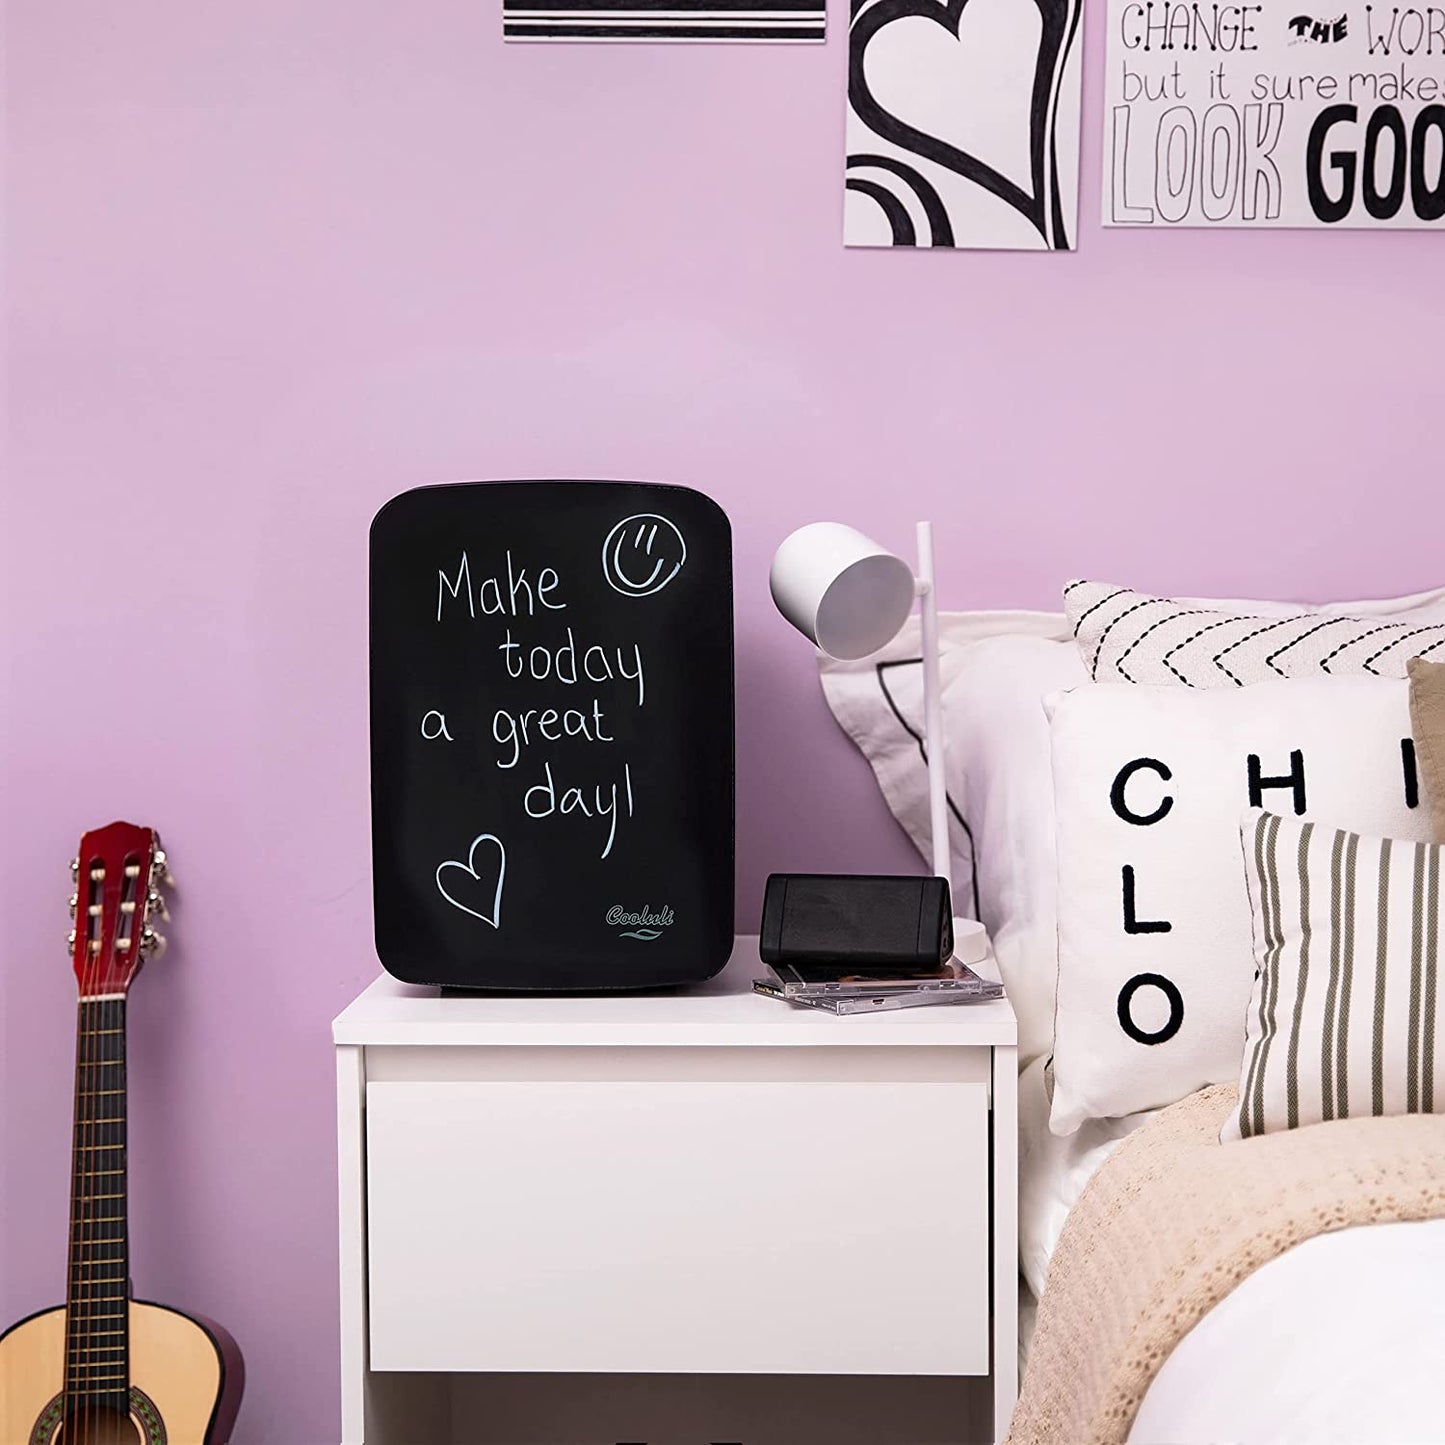 Compact Bedroom Mini Fridge with Cool Front Magnetic Blackboard - 15L Portable Refrigerator for Travel, Car, and Office Desk - Plug-in Cooler and Warmer for Food, Drinks, and Skincare - Sleek Black Design